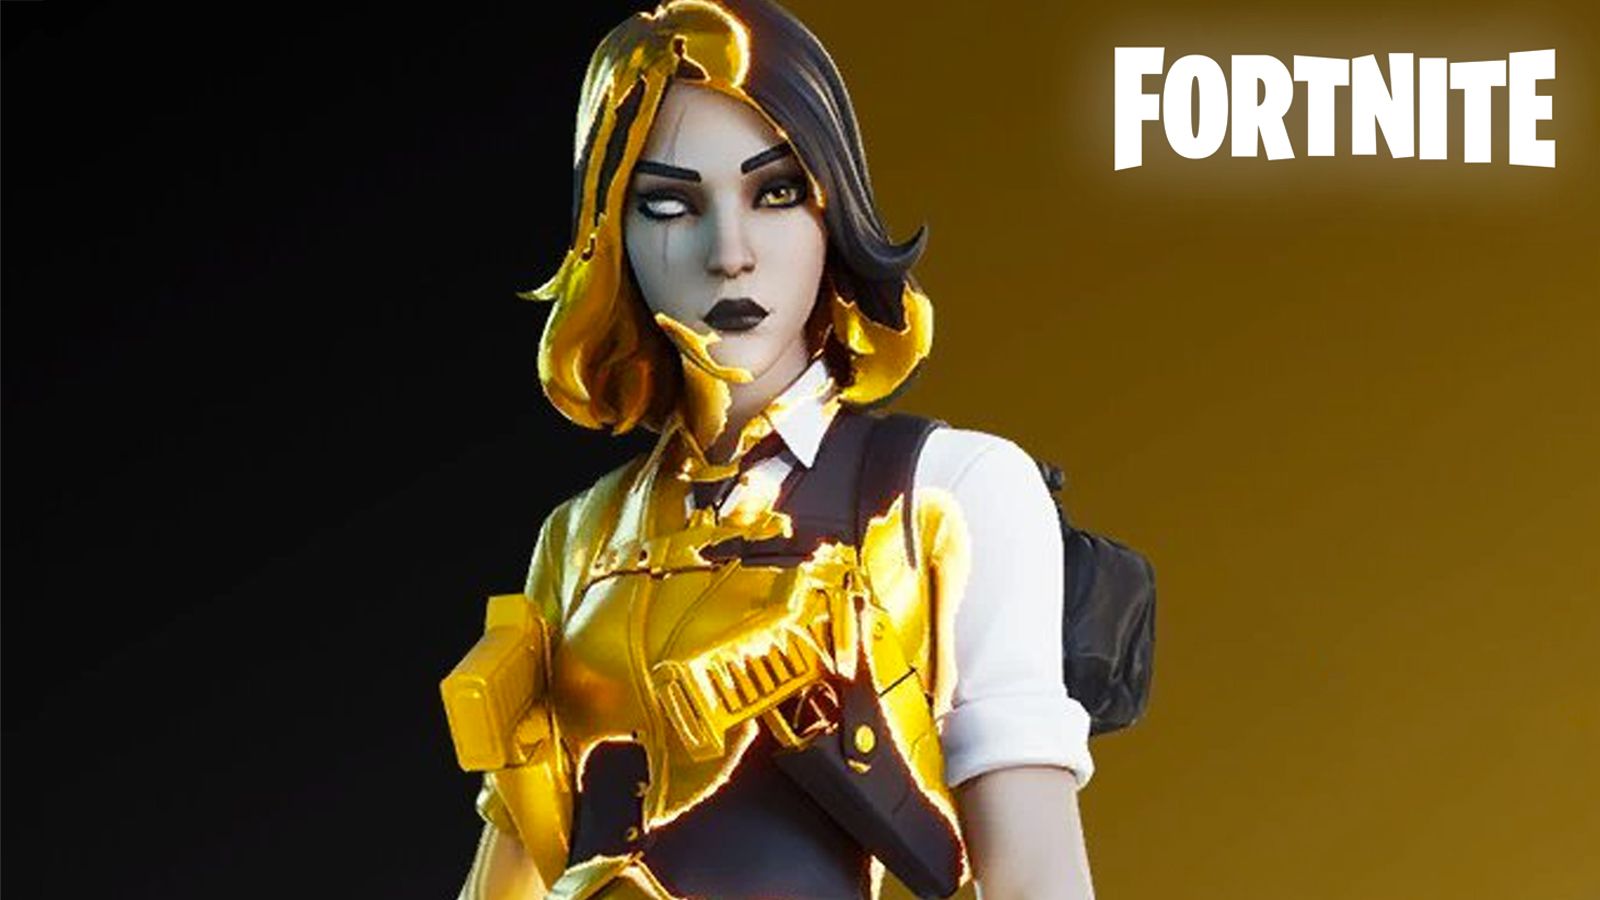 Fortnite female Midas skin MariGold leaked with Golden Touch bundle coming soon